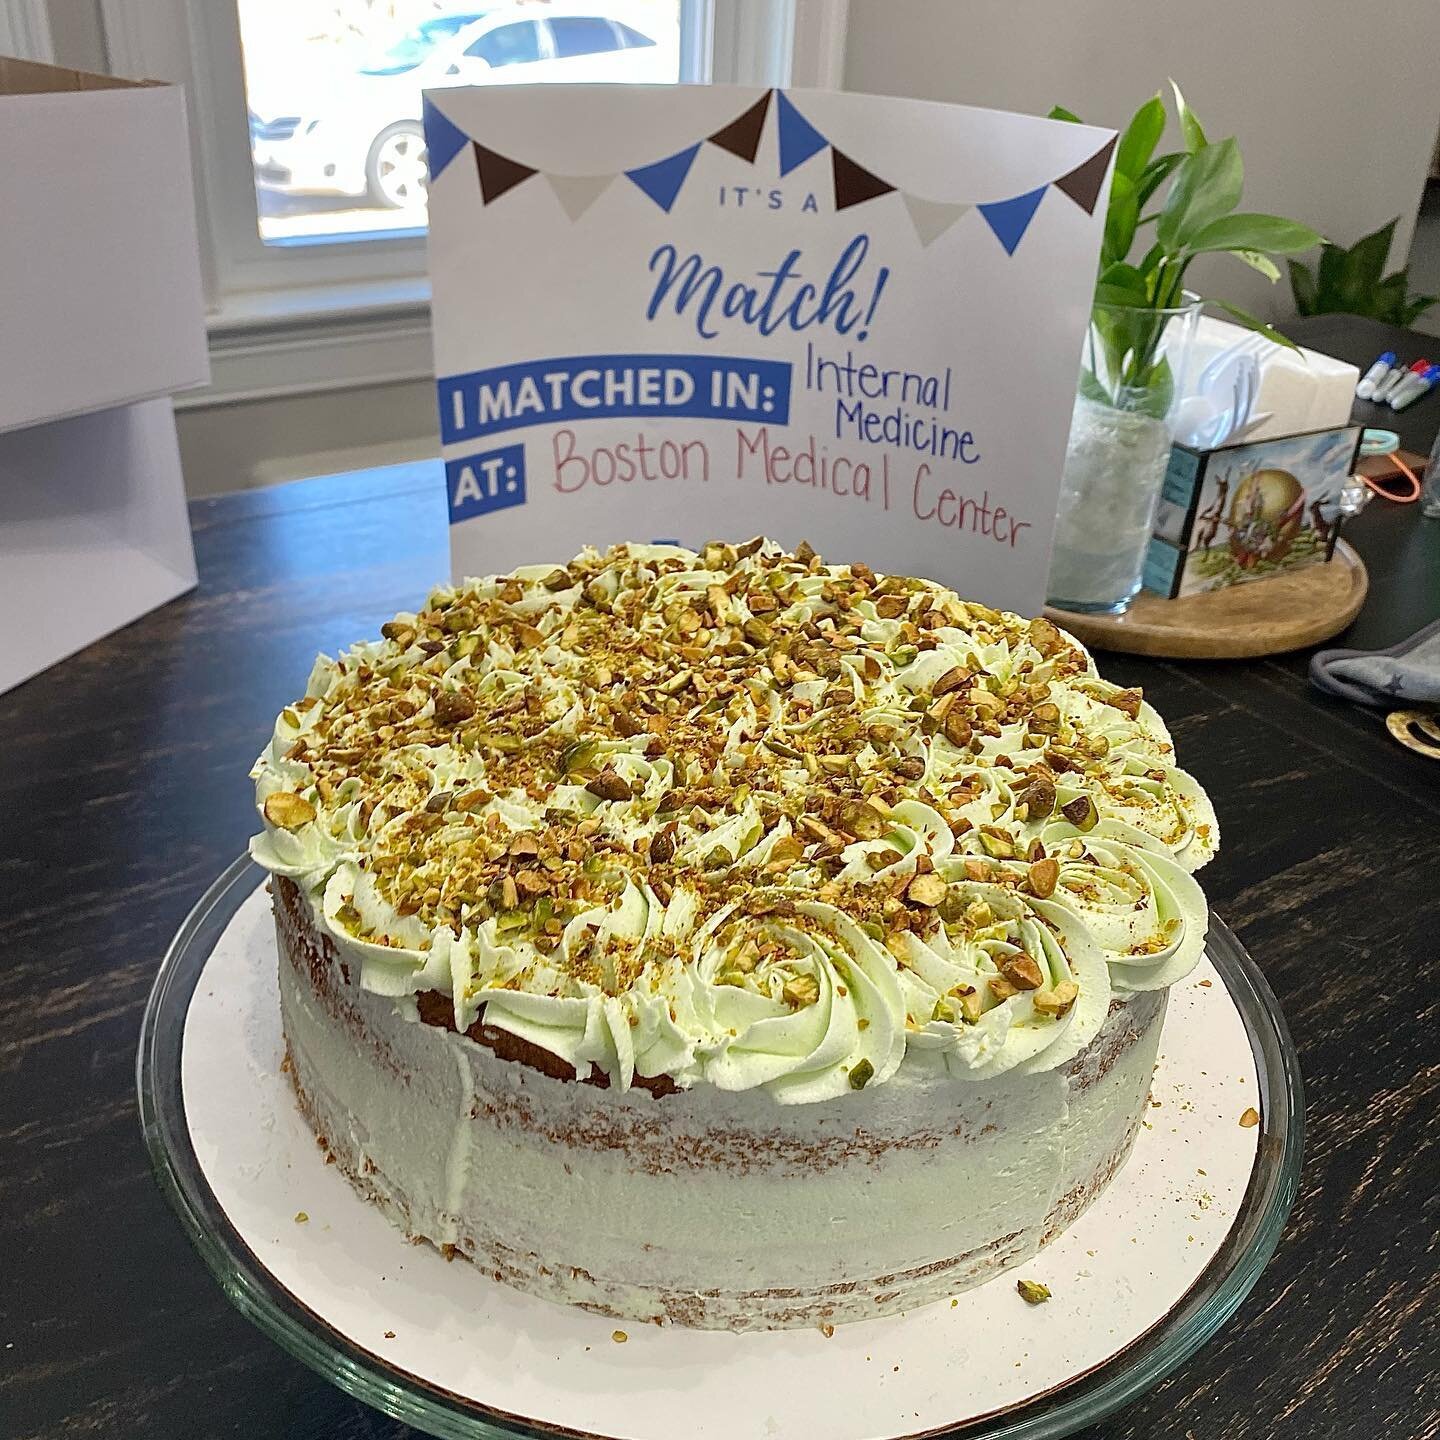 Happy Match Day to all the 4th year med students! We were honored to serve this pistachio cake for an extra special match 💕🌱
.
Our pistachio cake is made with fresh housemate pistachio milk and topped with crushed pistachios. I originally created t